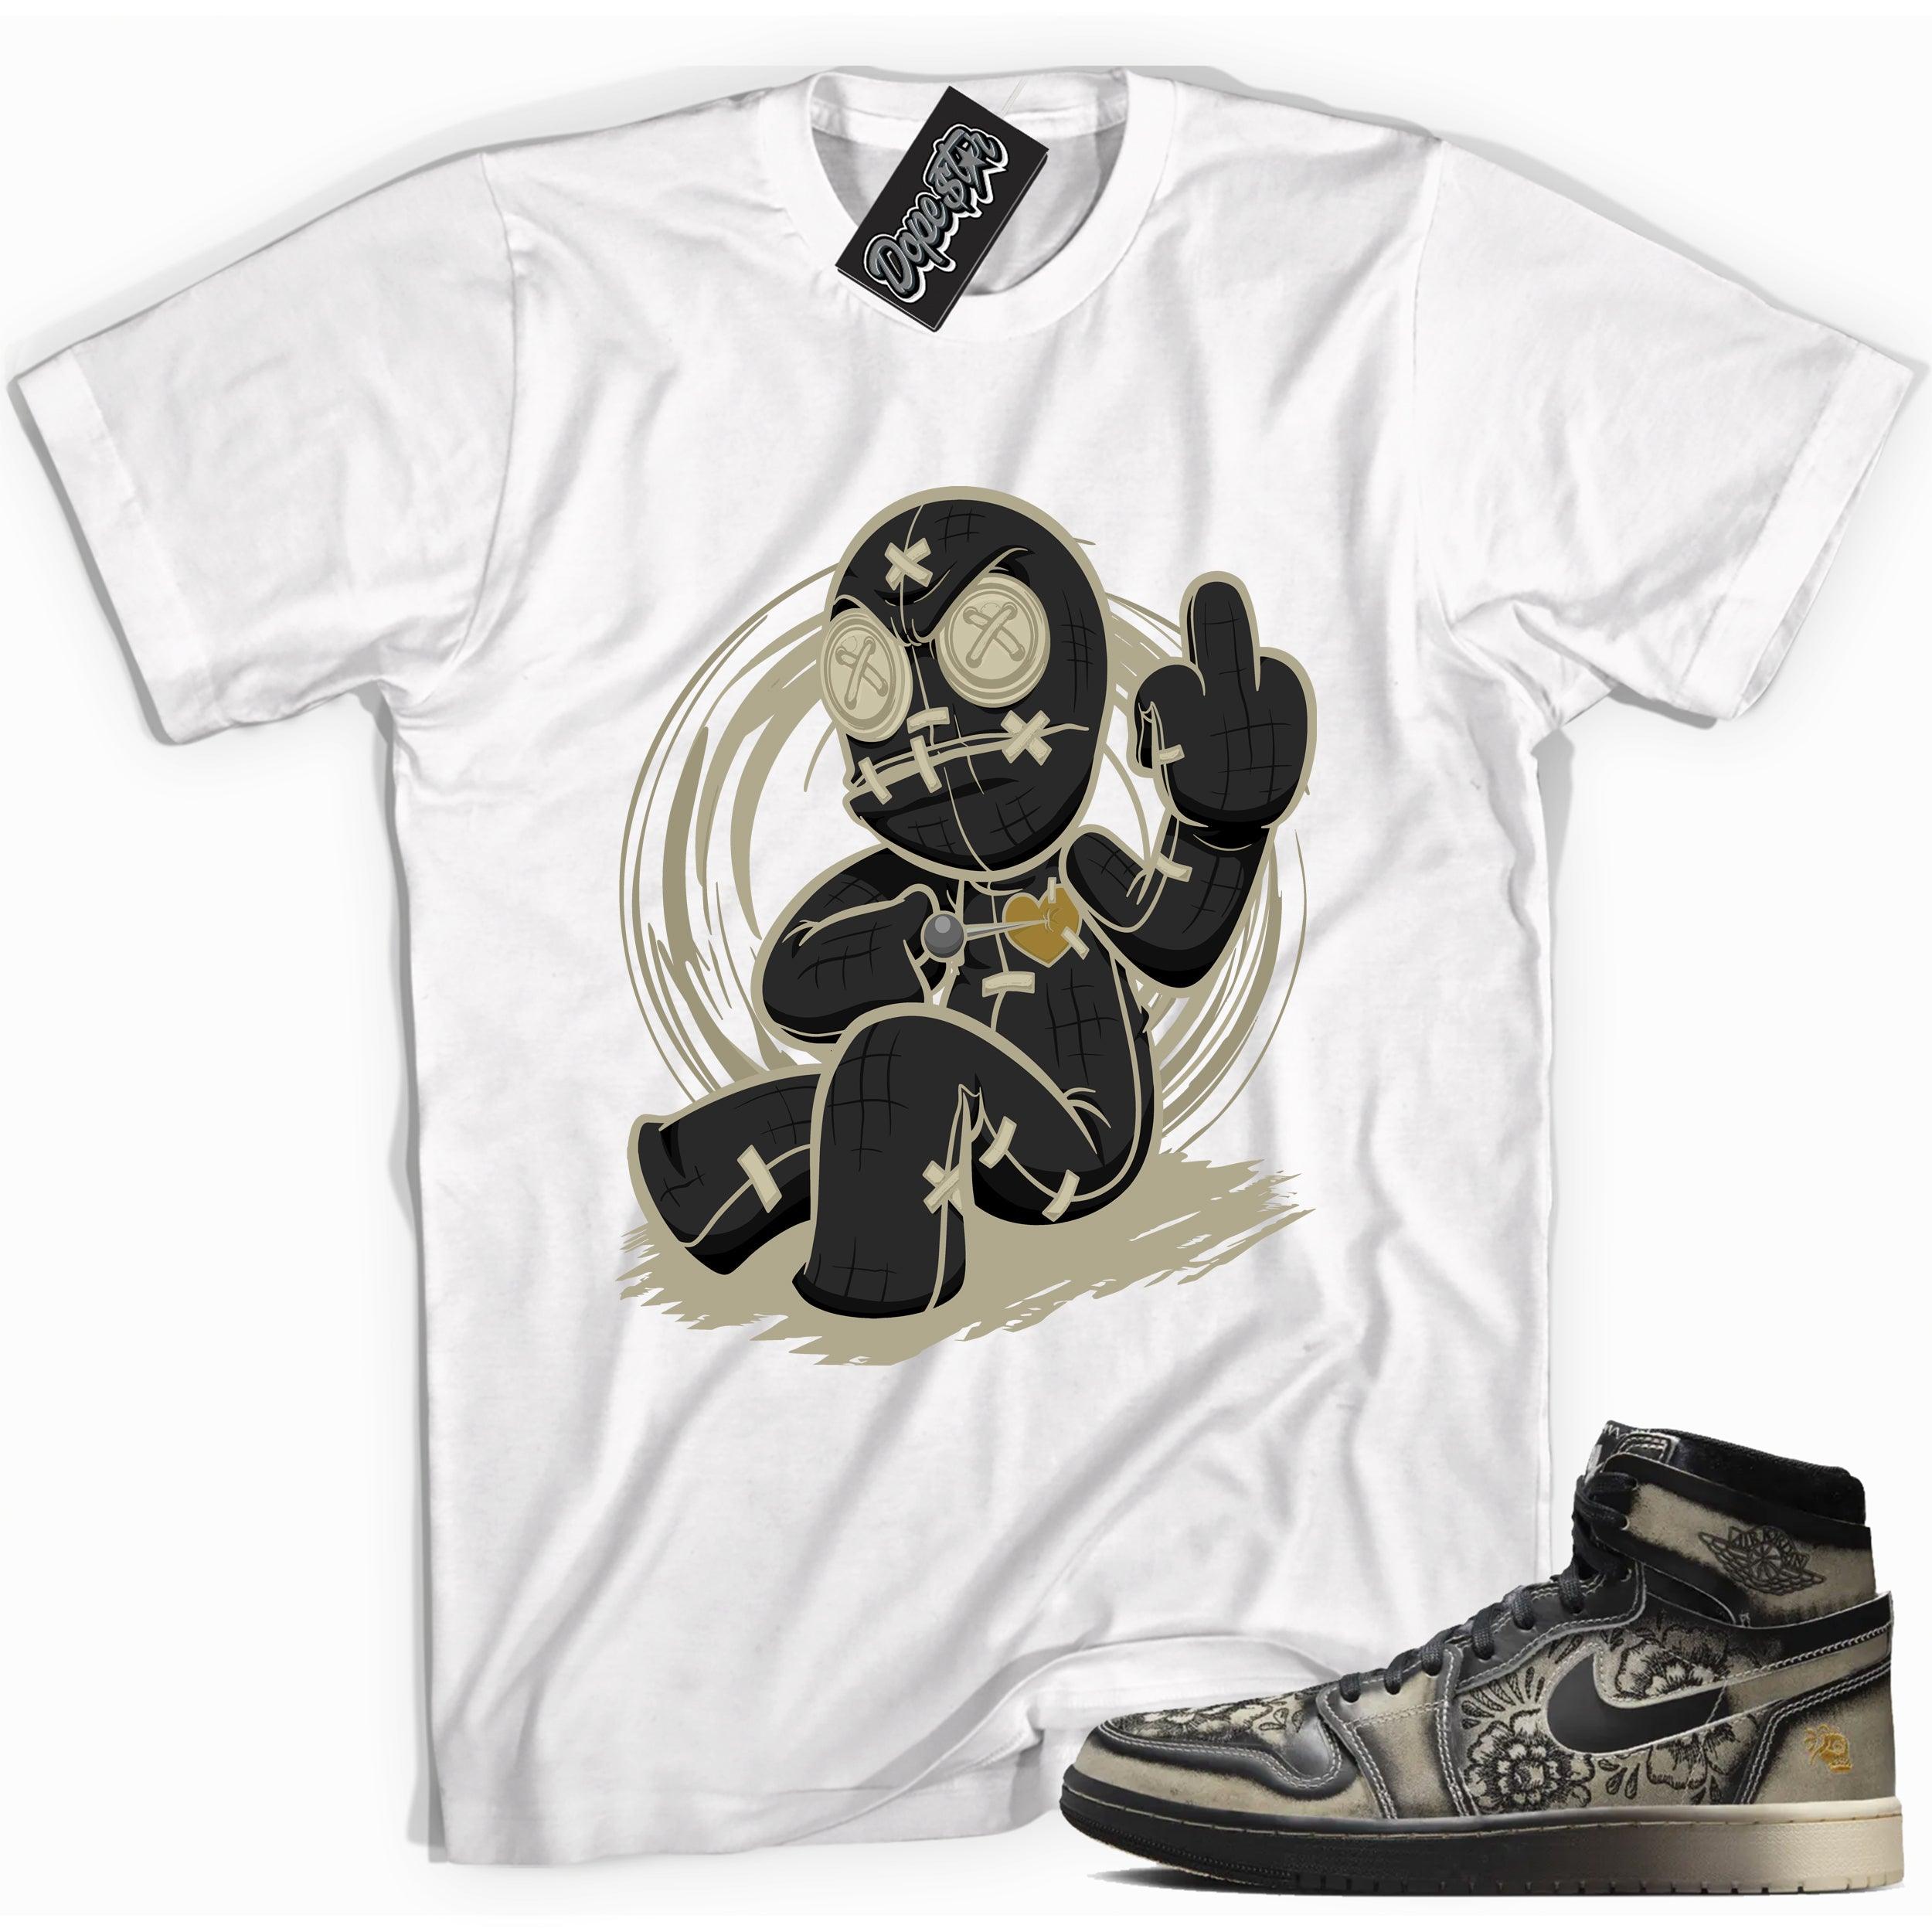 Cool White graphic tee with “ VooDoo Doll ” print, that perfectly matches Air Jordan 1 High Zoom Comfort 2 Dia de Muertos Black and Pale Ivory sneakers 